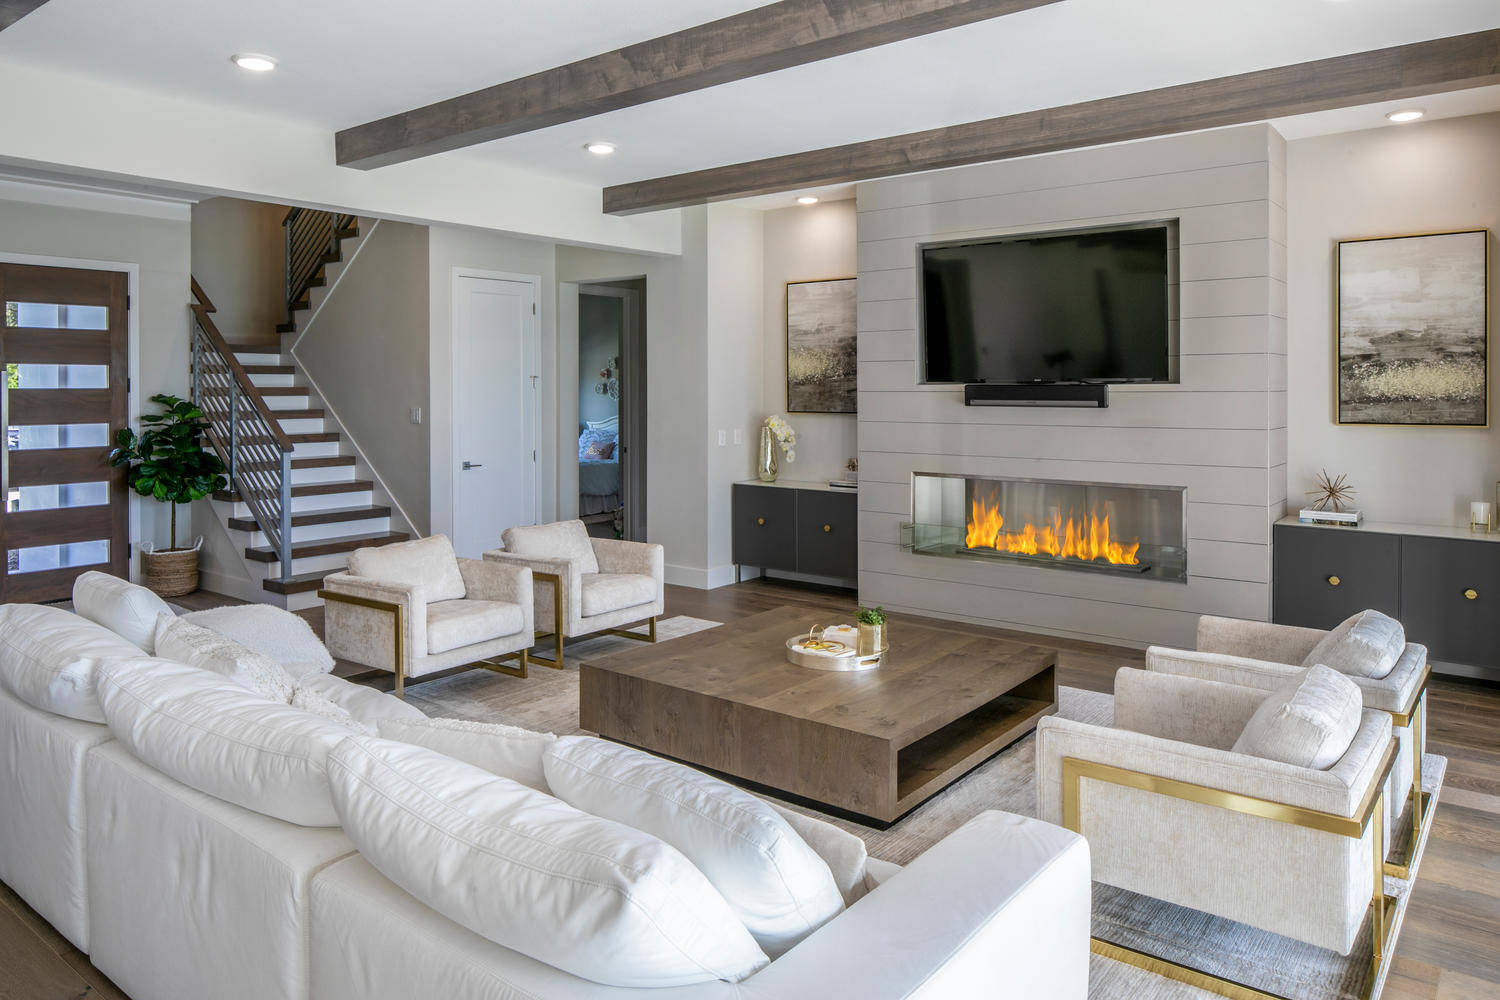 75 Beautiful Modern Living Room Pictures Ideas February 2021 Houzz